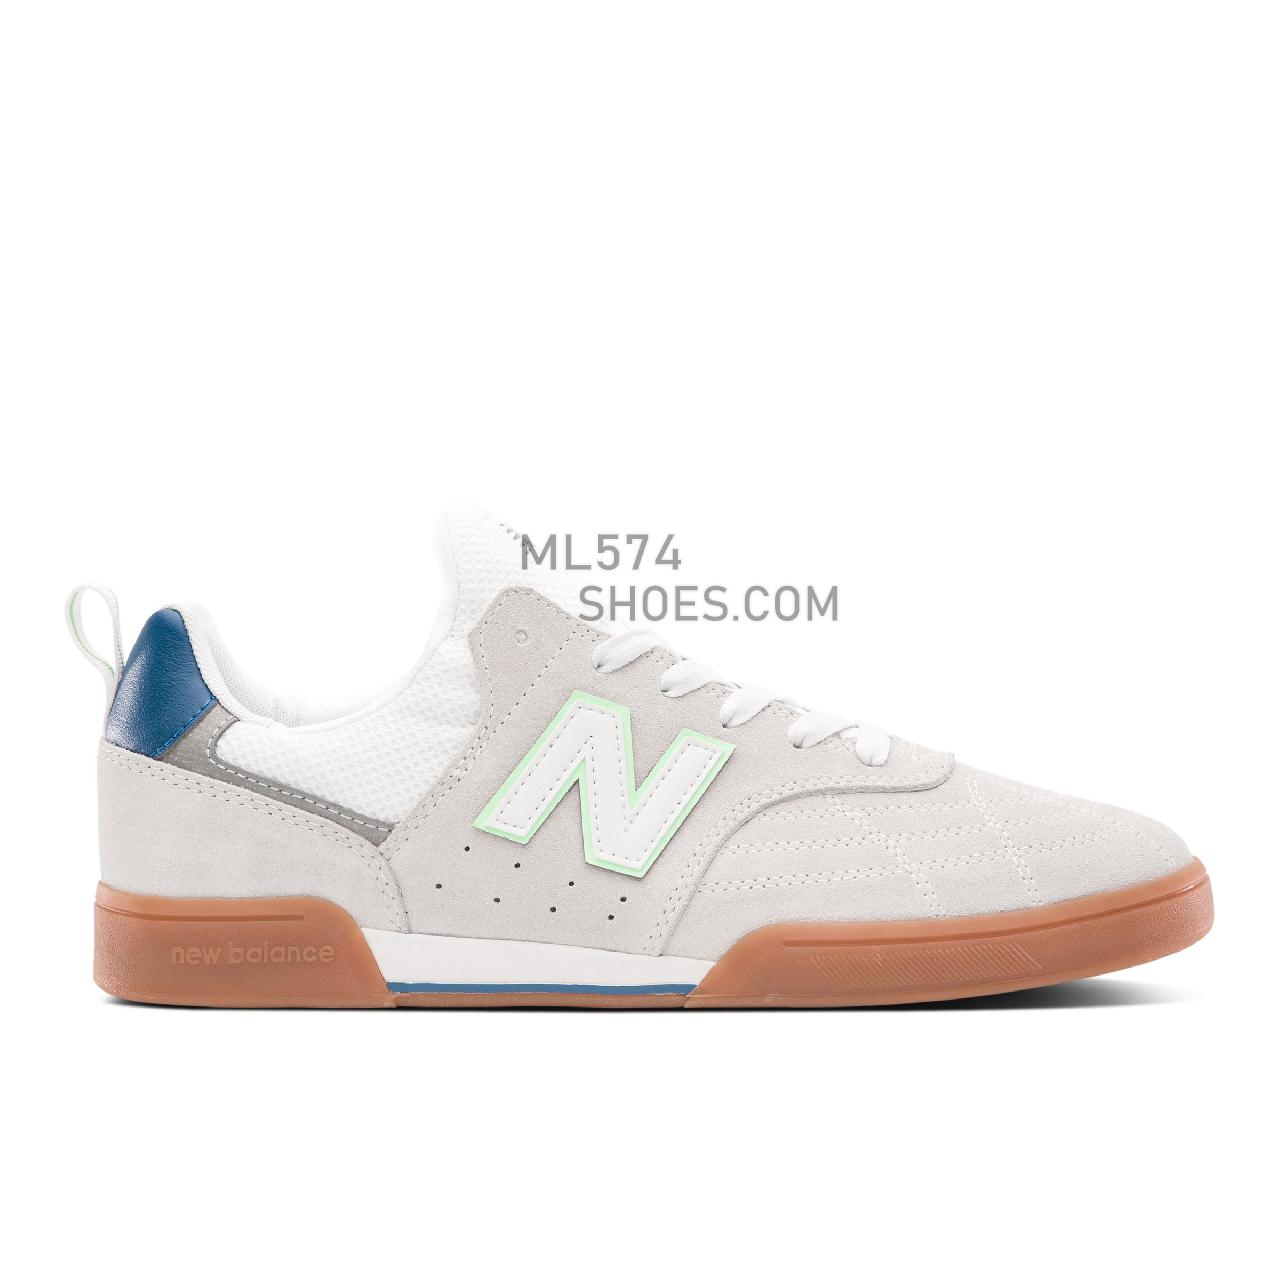 New Balance NB NUMERIC 288 SPORT - Men's NB Numeric Skate - White with Powder Green - NM288SSE